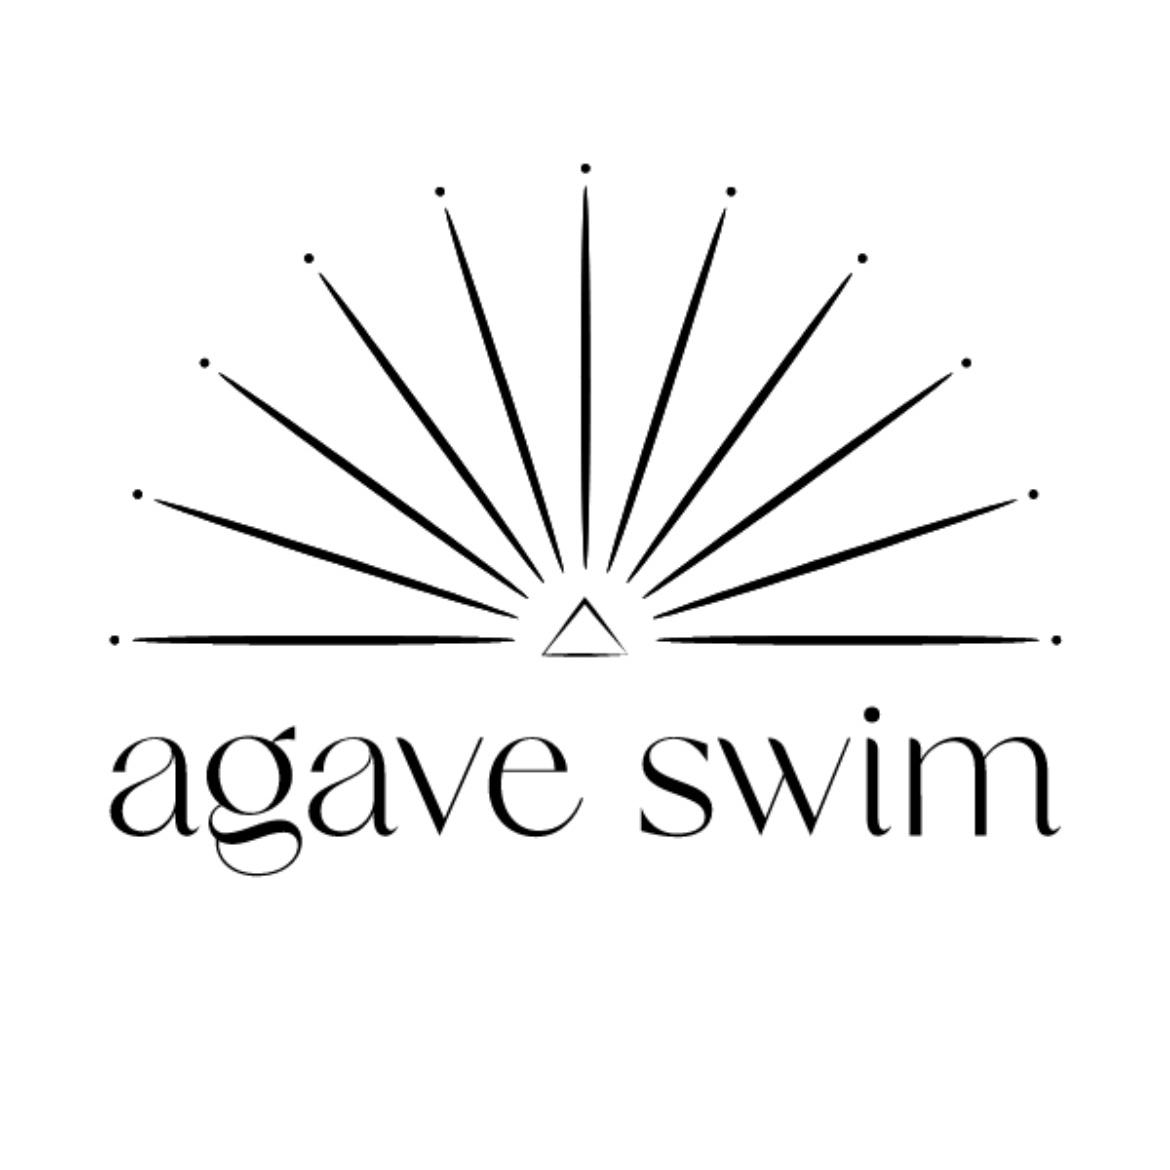 agave_swim's images